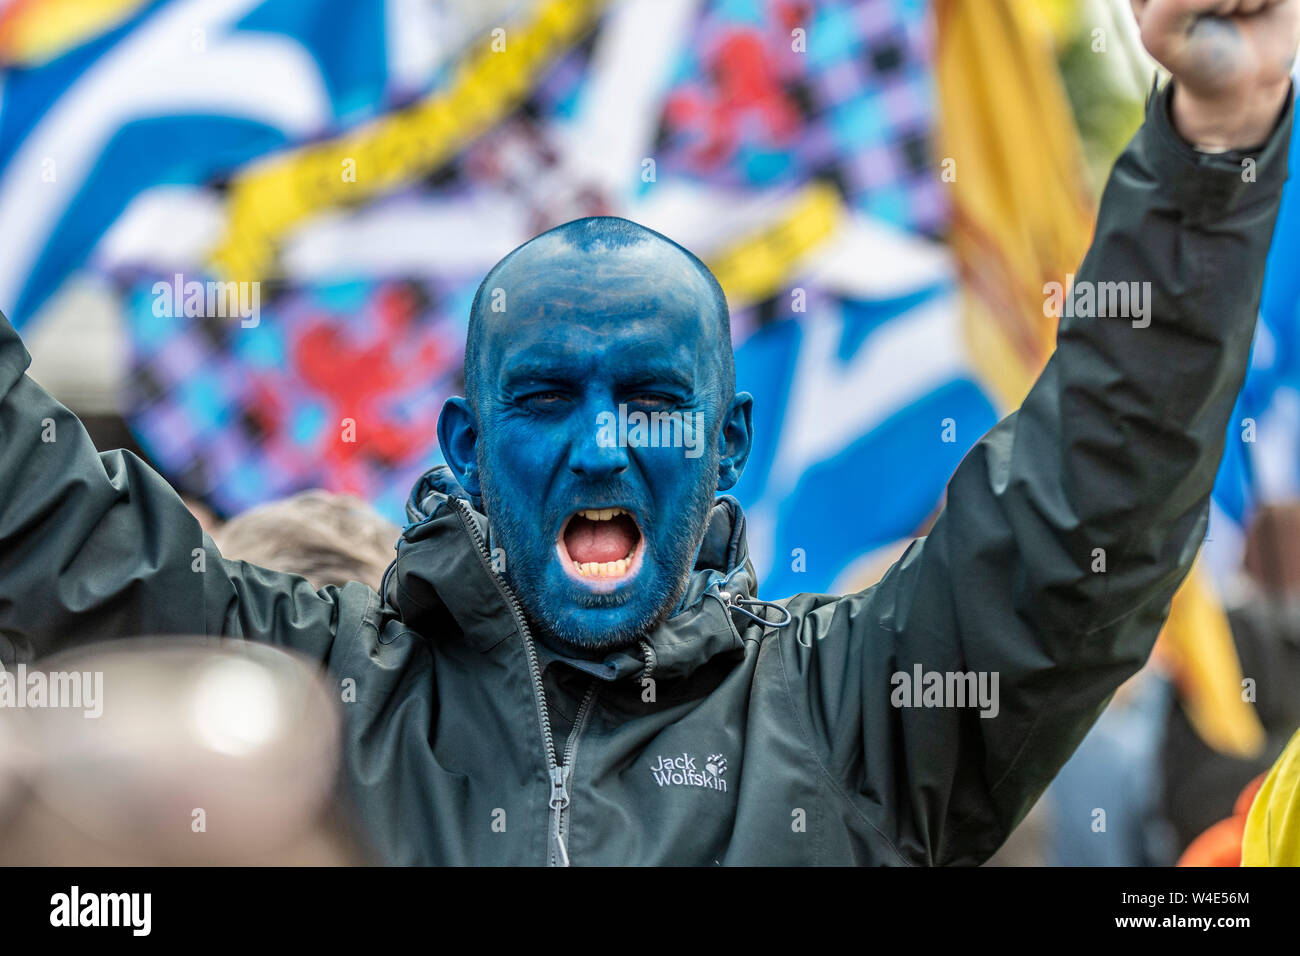 Glasgow, All Under One Banner independence march - 2019 Stock Photo